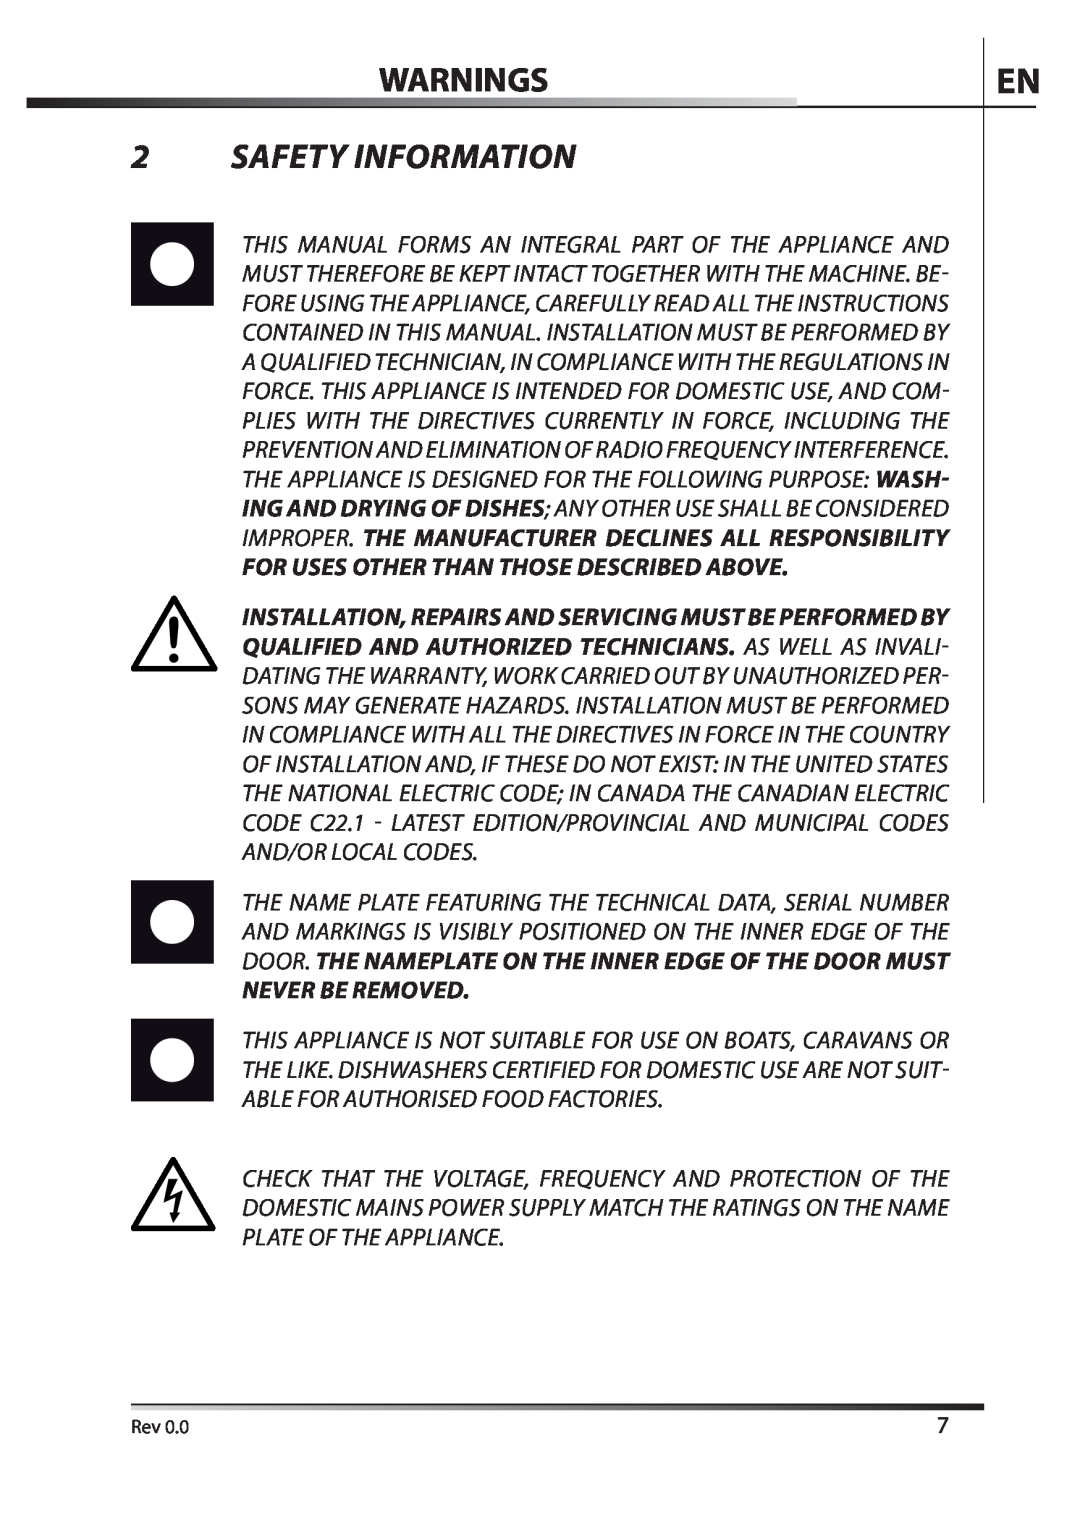 AEG F89078VI-M user manual Warnings, Safety Information, For Uses Other Than Those Described Above, Never Be Removed 